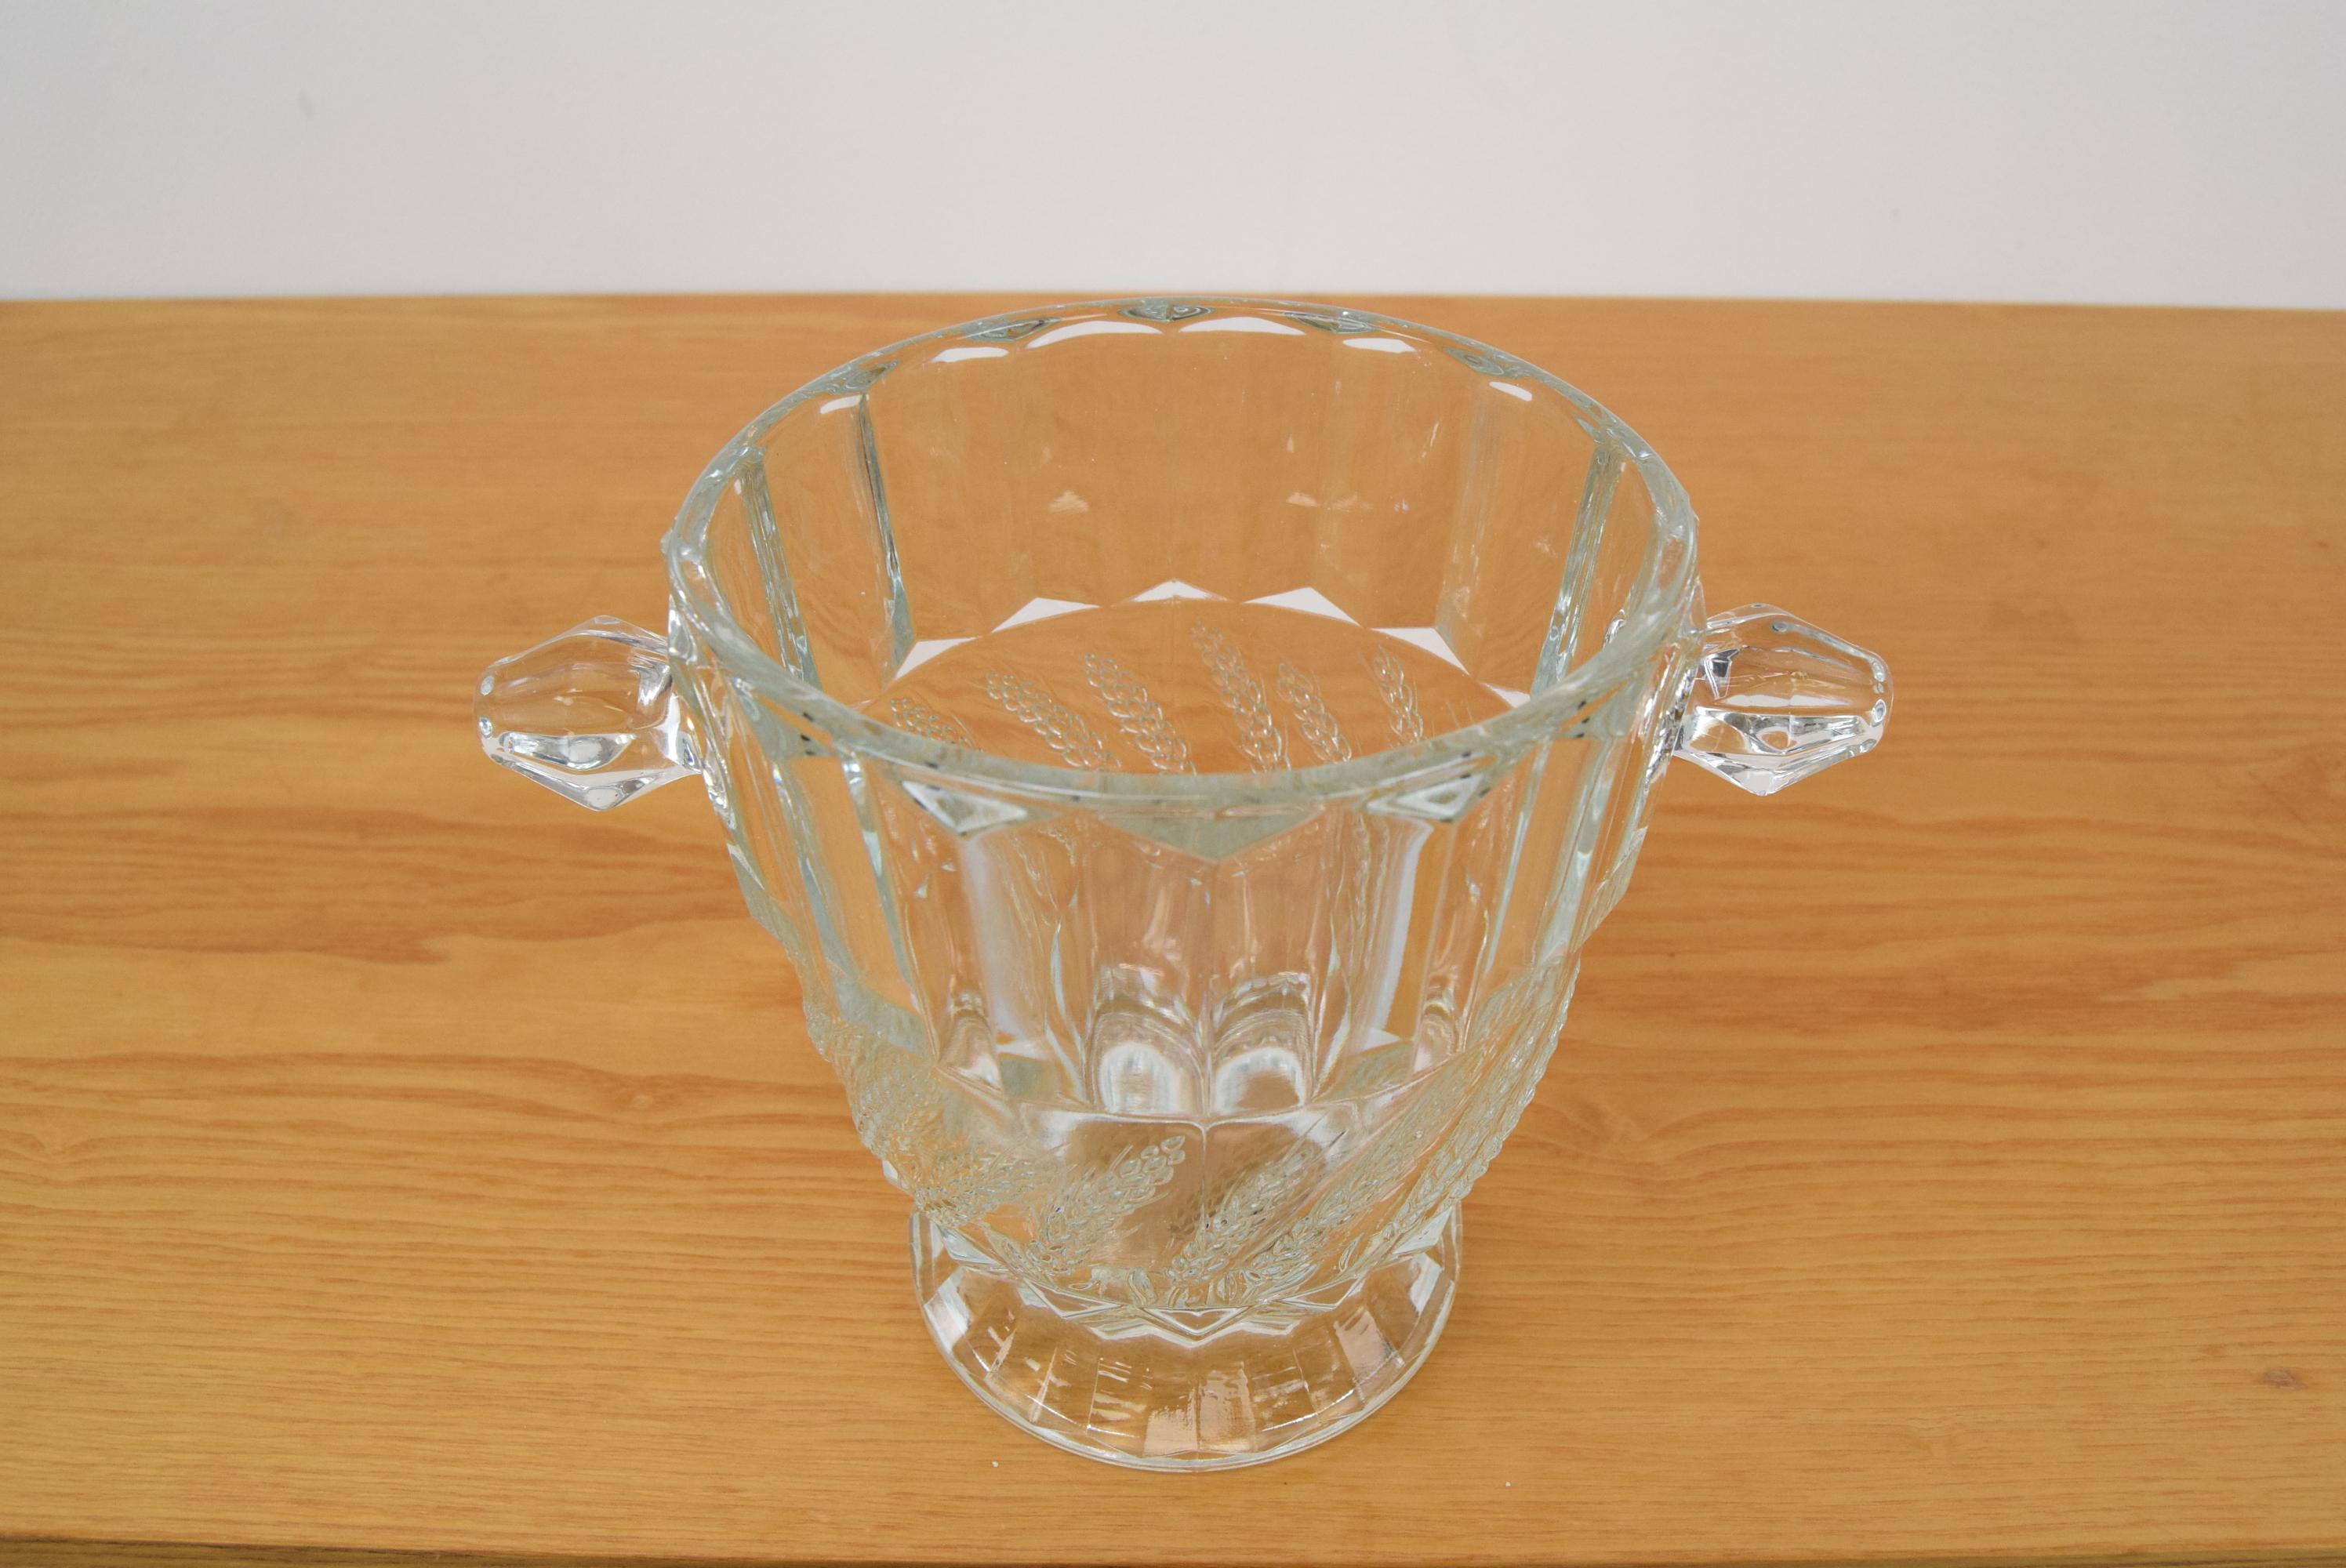 Made in Czechoslovakia
Made of Glass
Re-polished
Good Original condition.